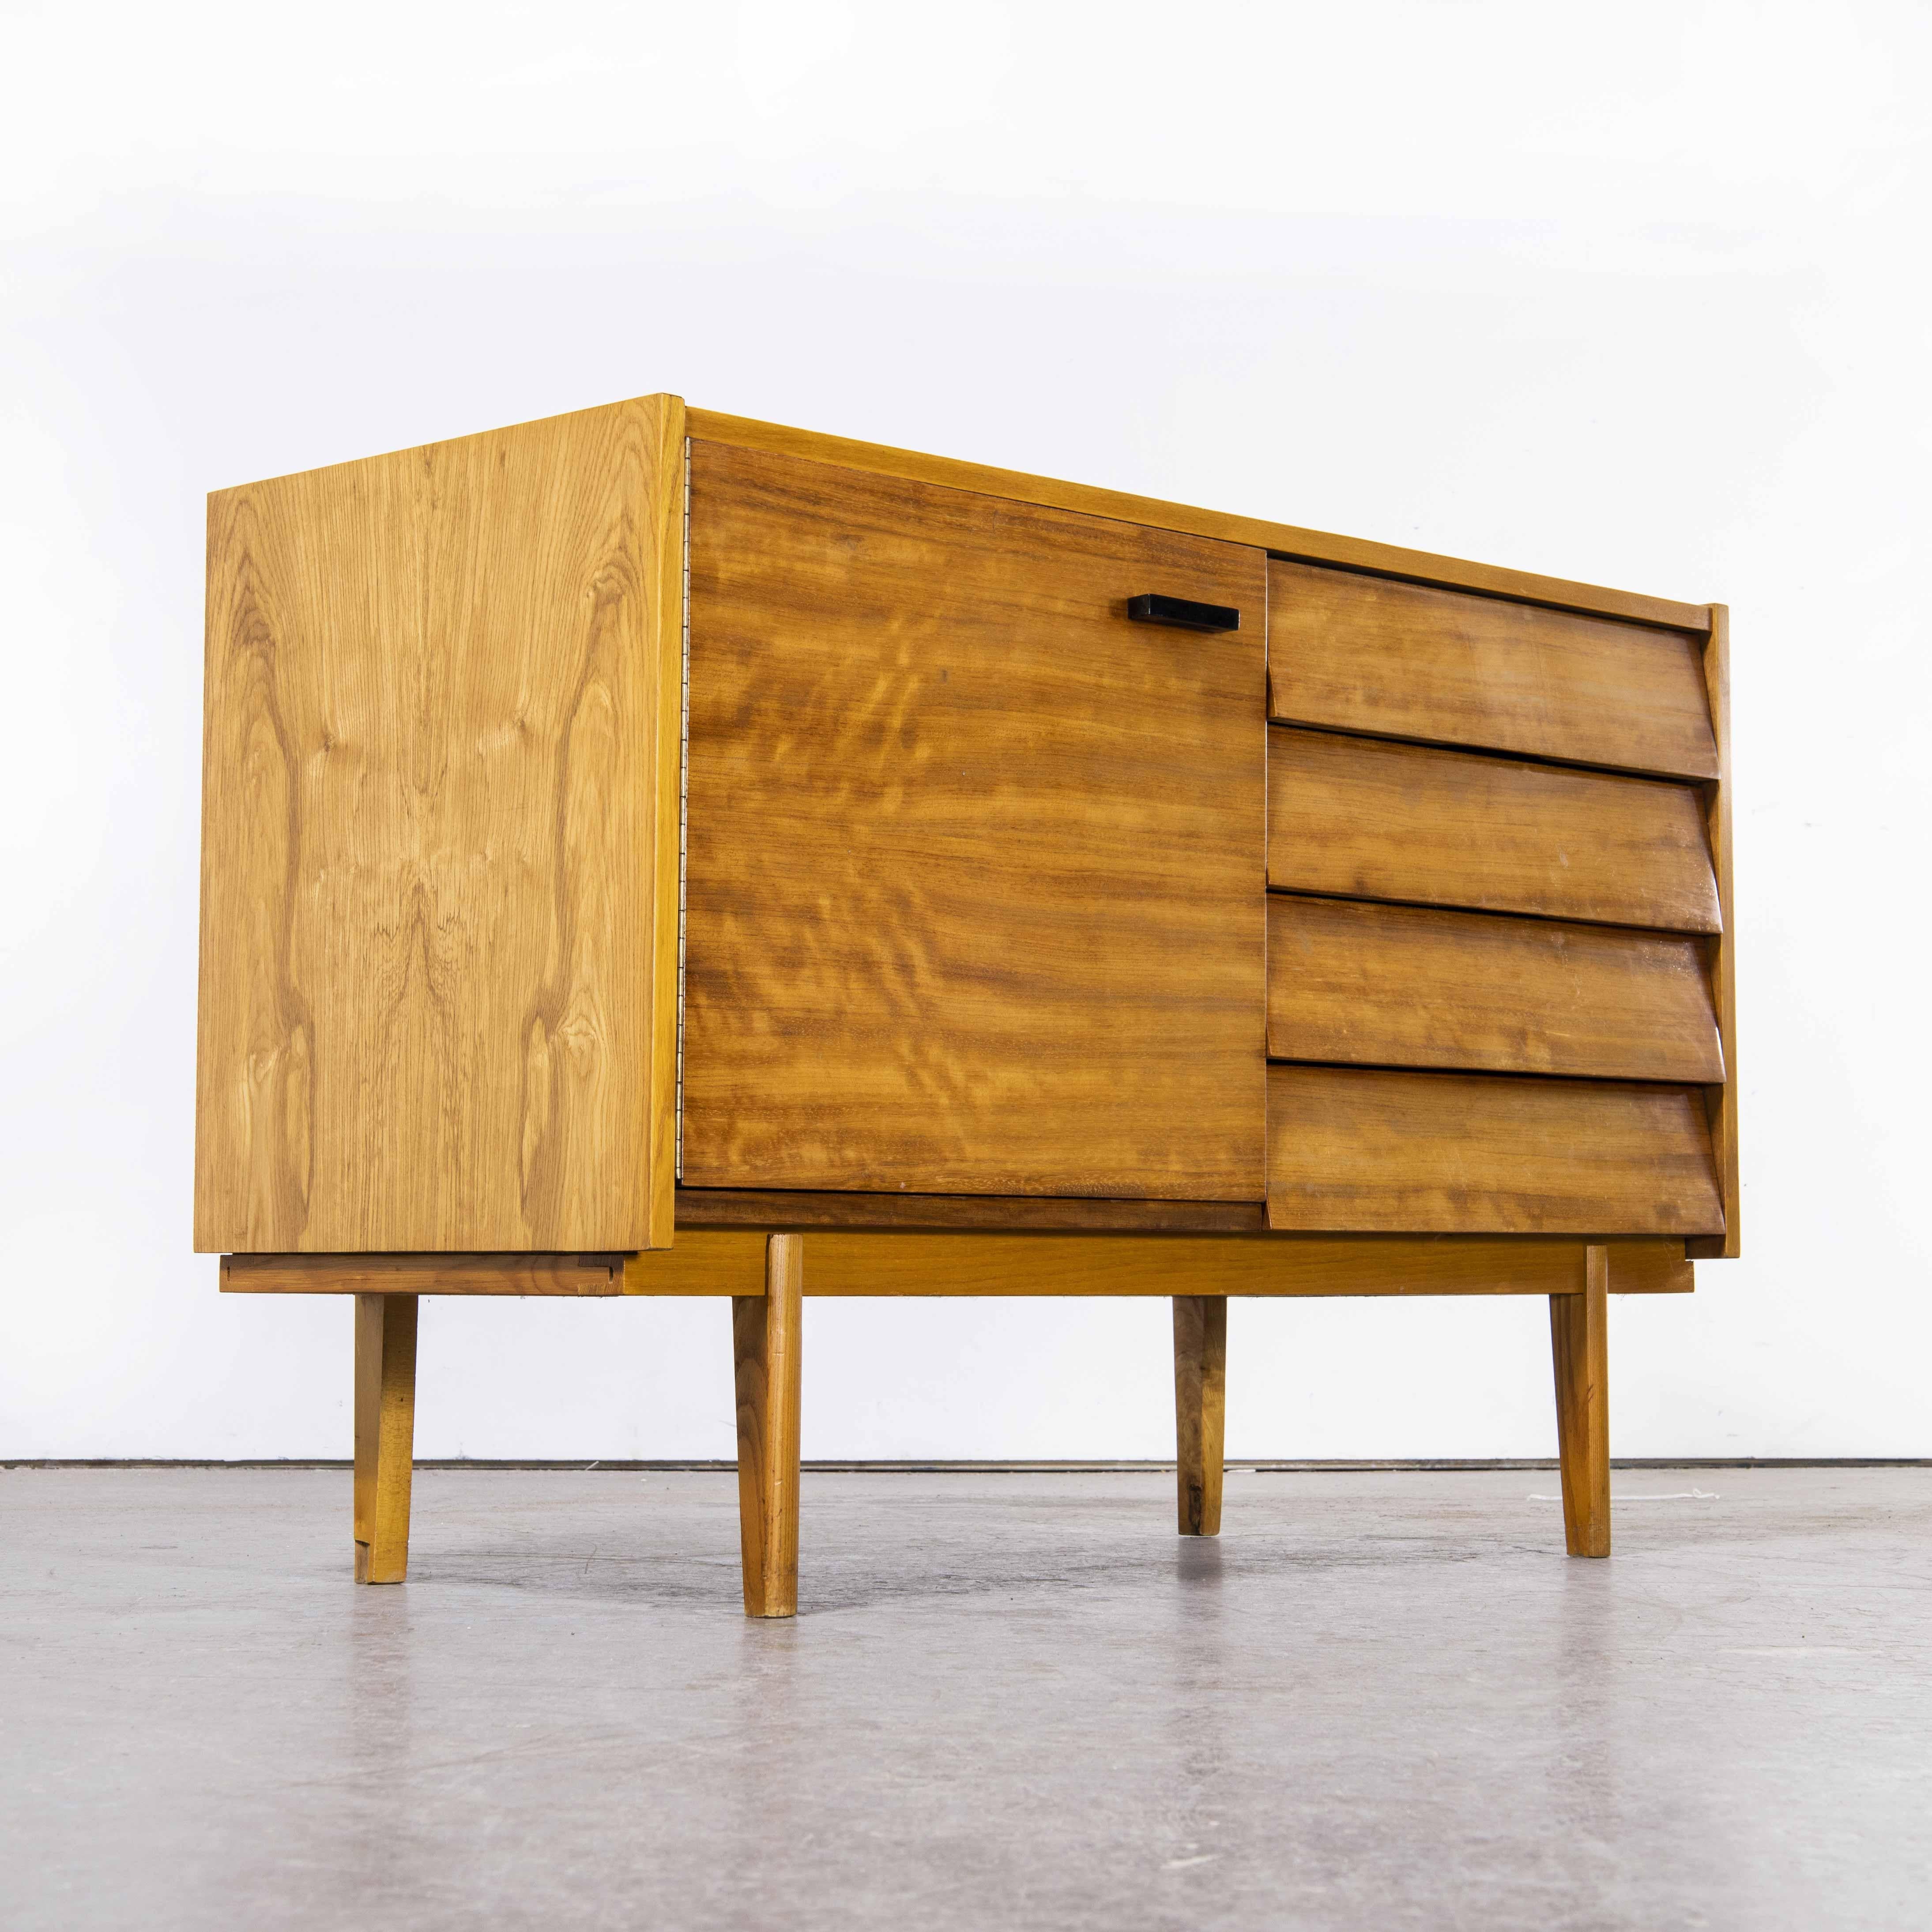 Model U-458, 1950’s four drawer oak cabinet by Jiri Jiroutek For Interieur Praha
Model U-458, 1950’s four drawer oak cabinet by Jiri Jiroutek For Interieur Praha. These chest of drawers/cabinets by Praha are increasingly popular due to their